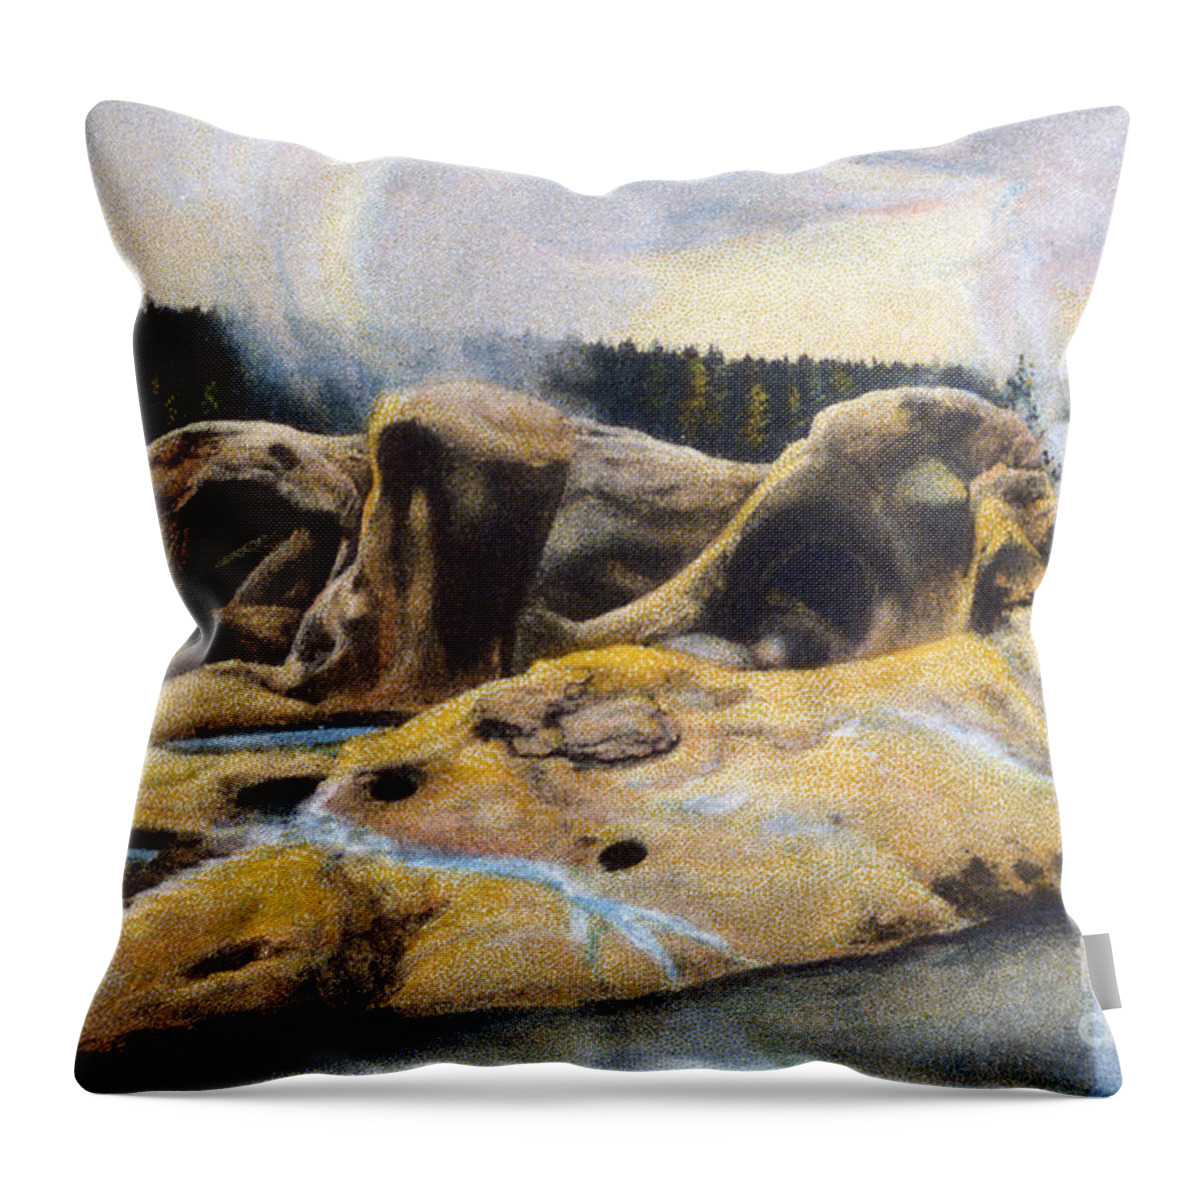 Grotto Geyser Throw Pillow featuring the photograph Grotto Geyser Yellowstone Np 1928 by NPS Photo Asahel Curtis